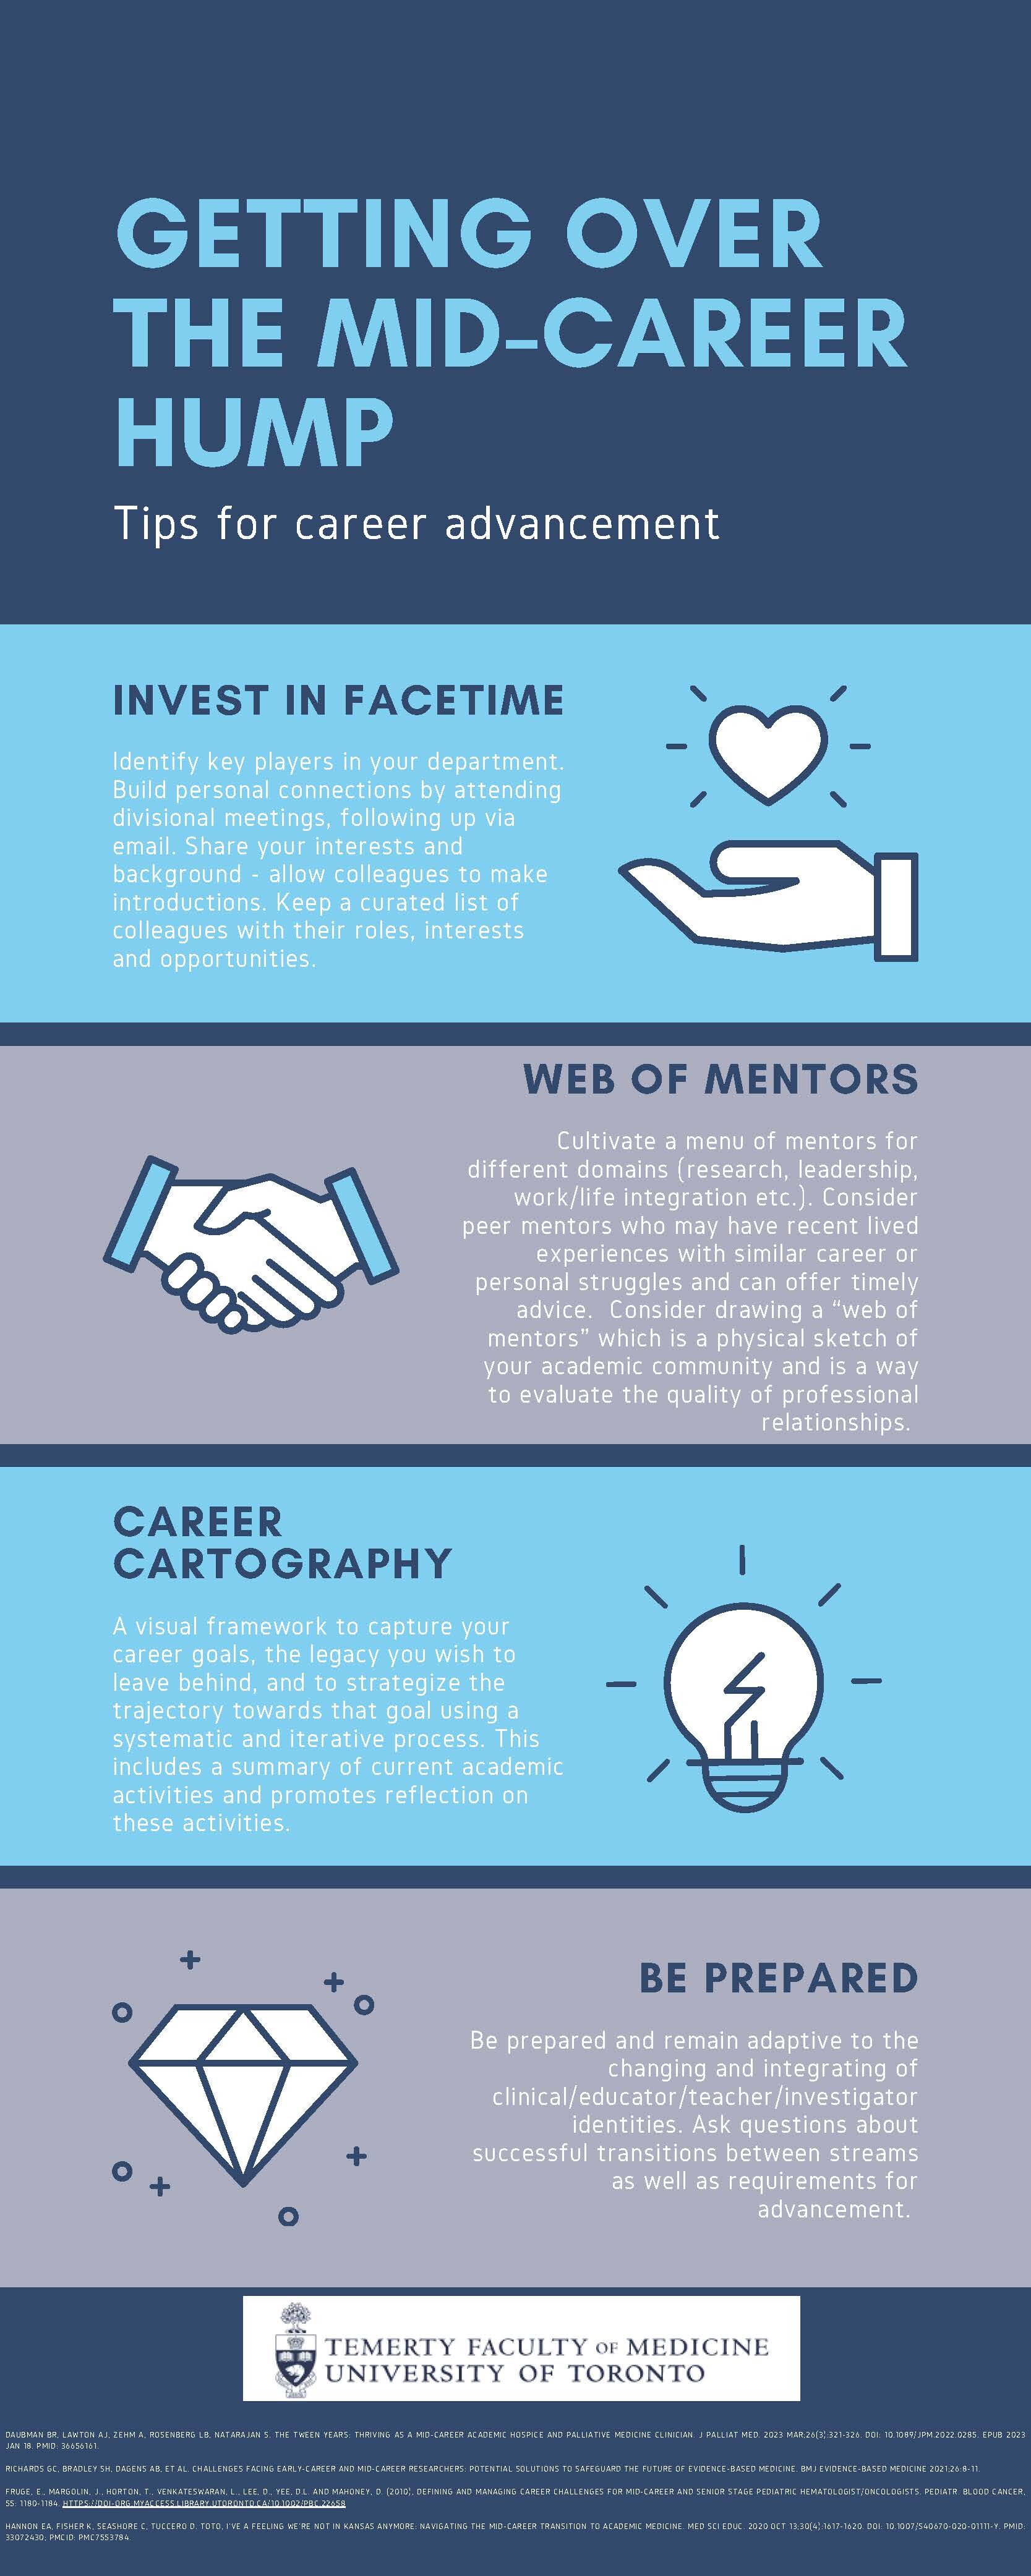 Getting over the mid-career hump infographic